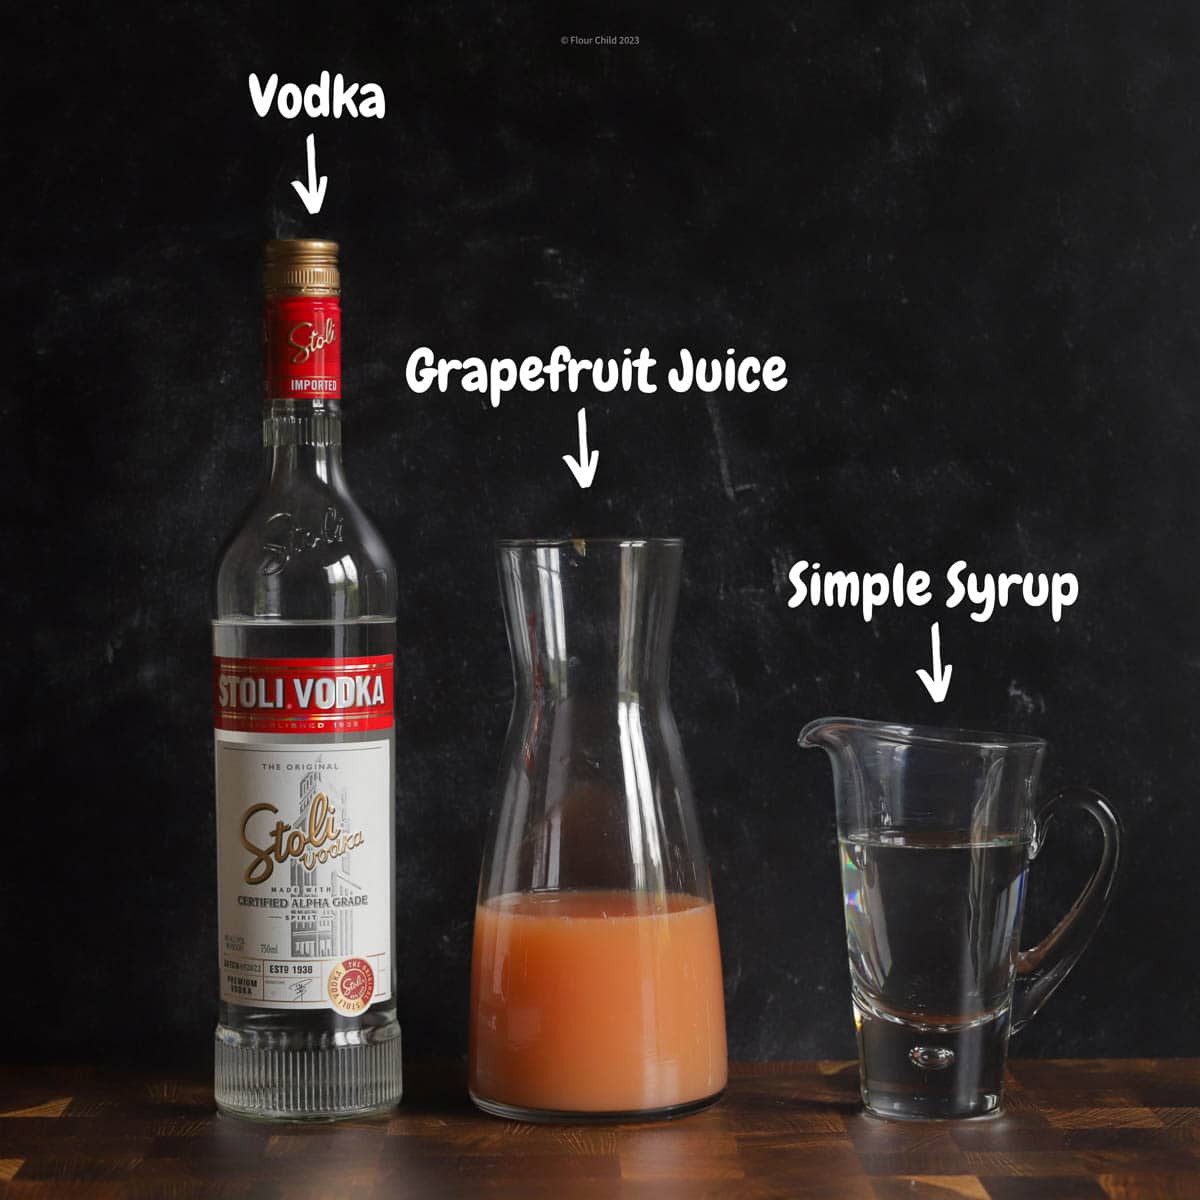 A bottle of vodka and a carafe of grapefruit juice and a glass of simple syrup on a black background